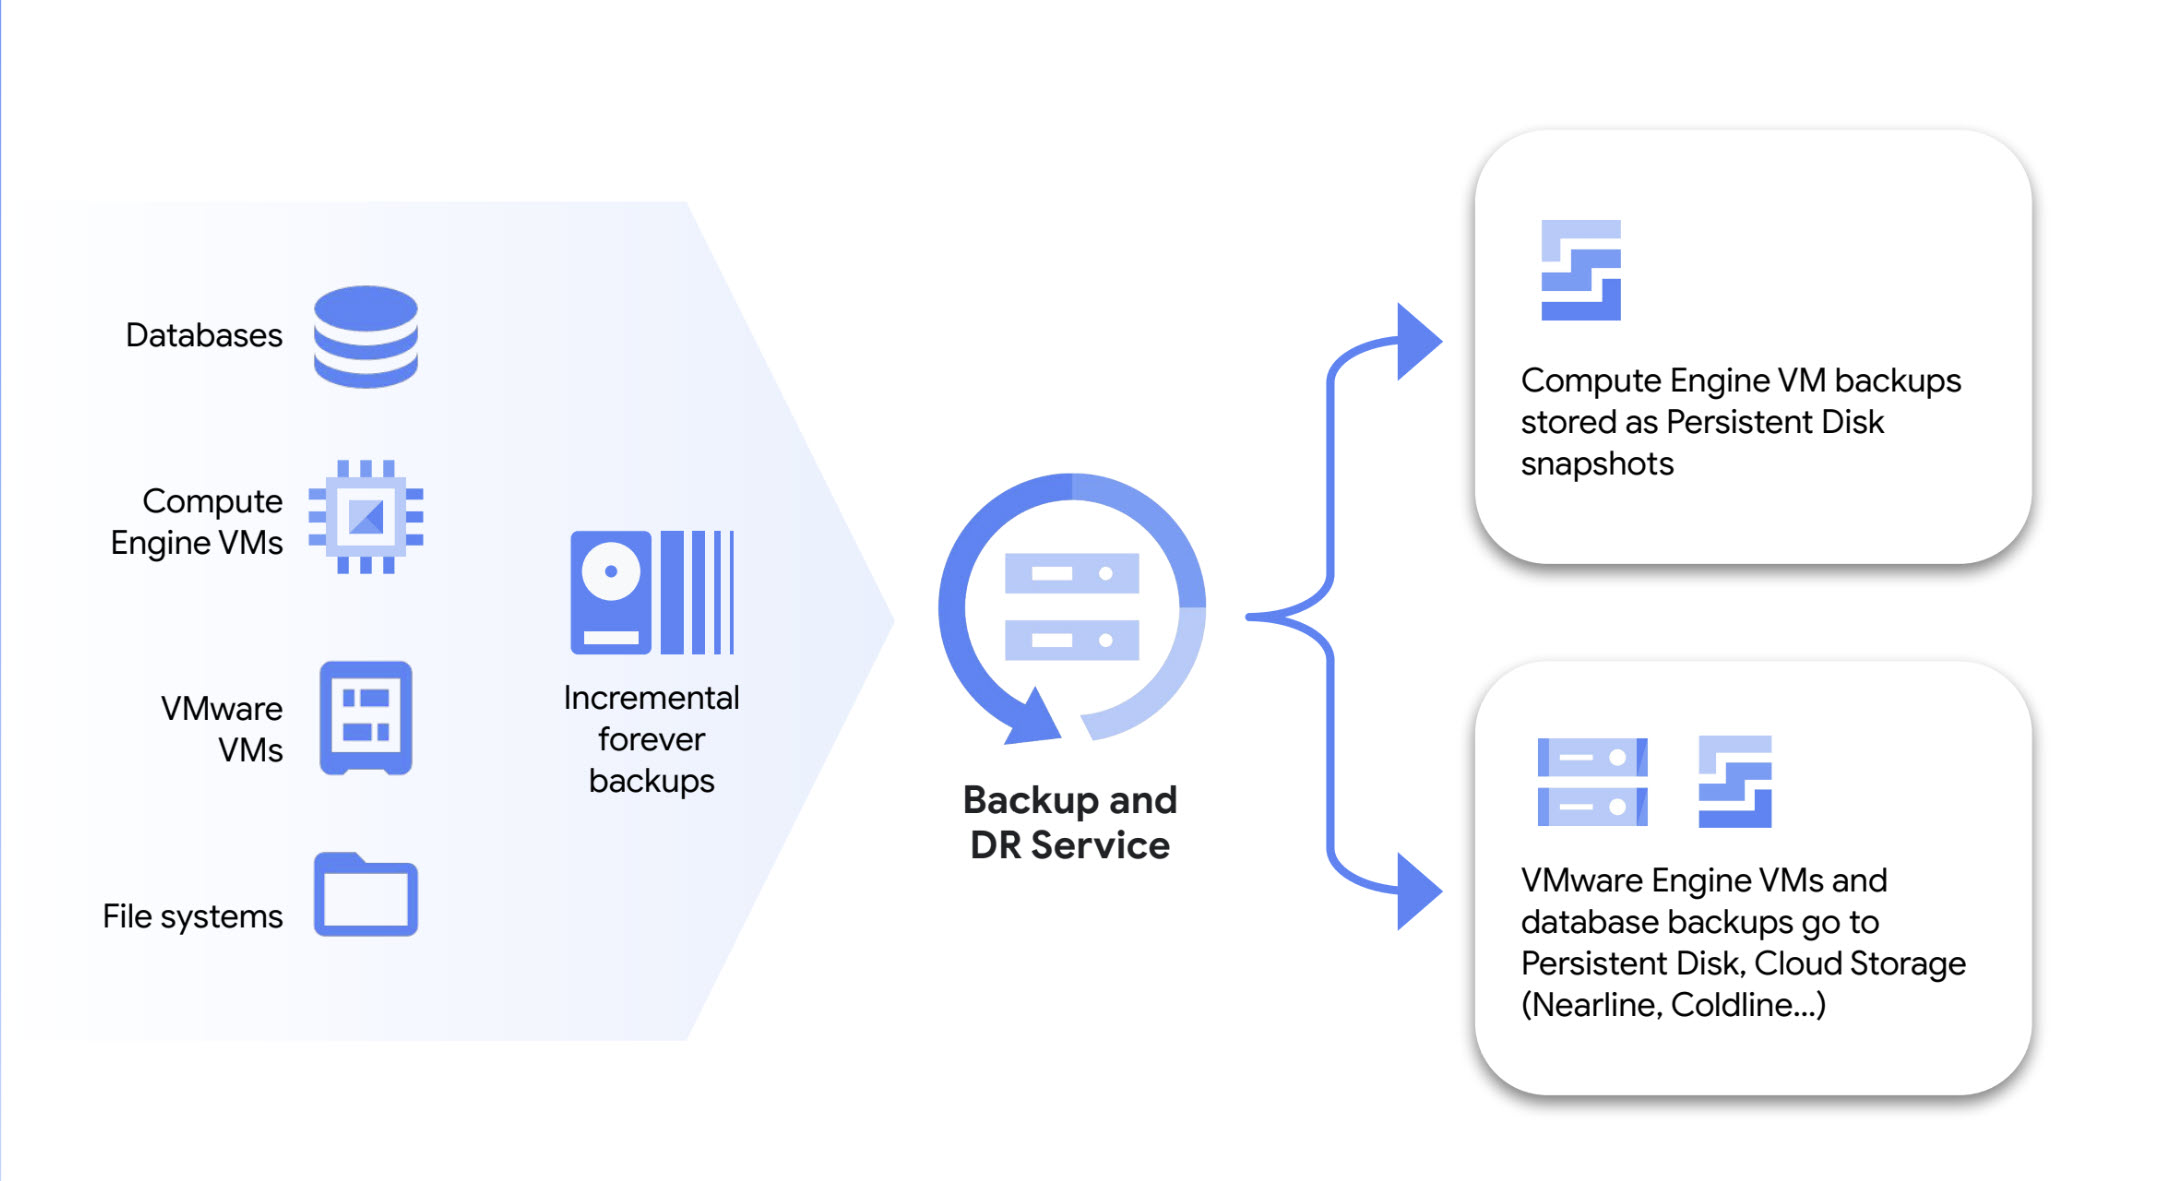 Basic overview of Google Cloud Backup and DR